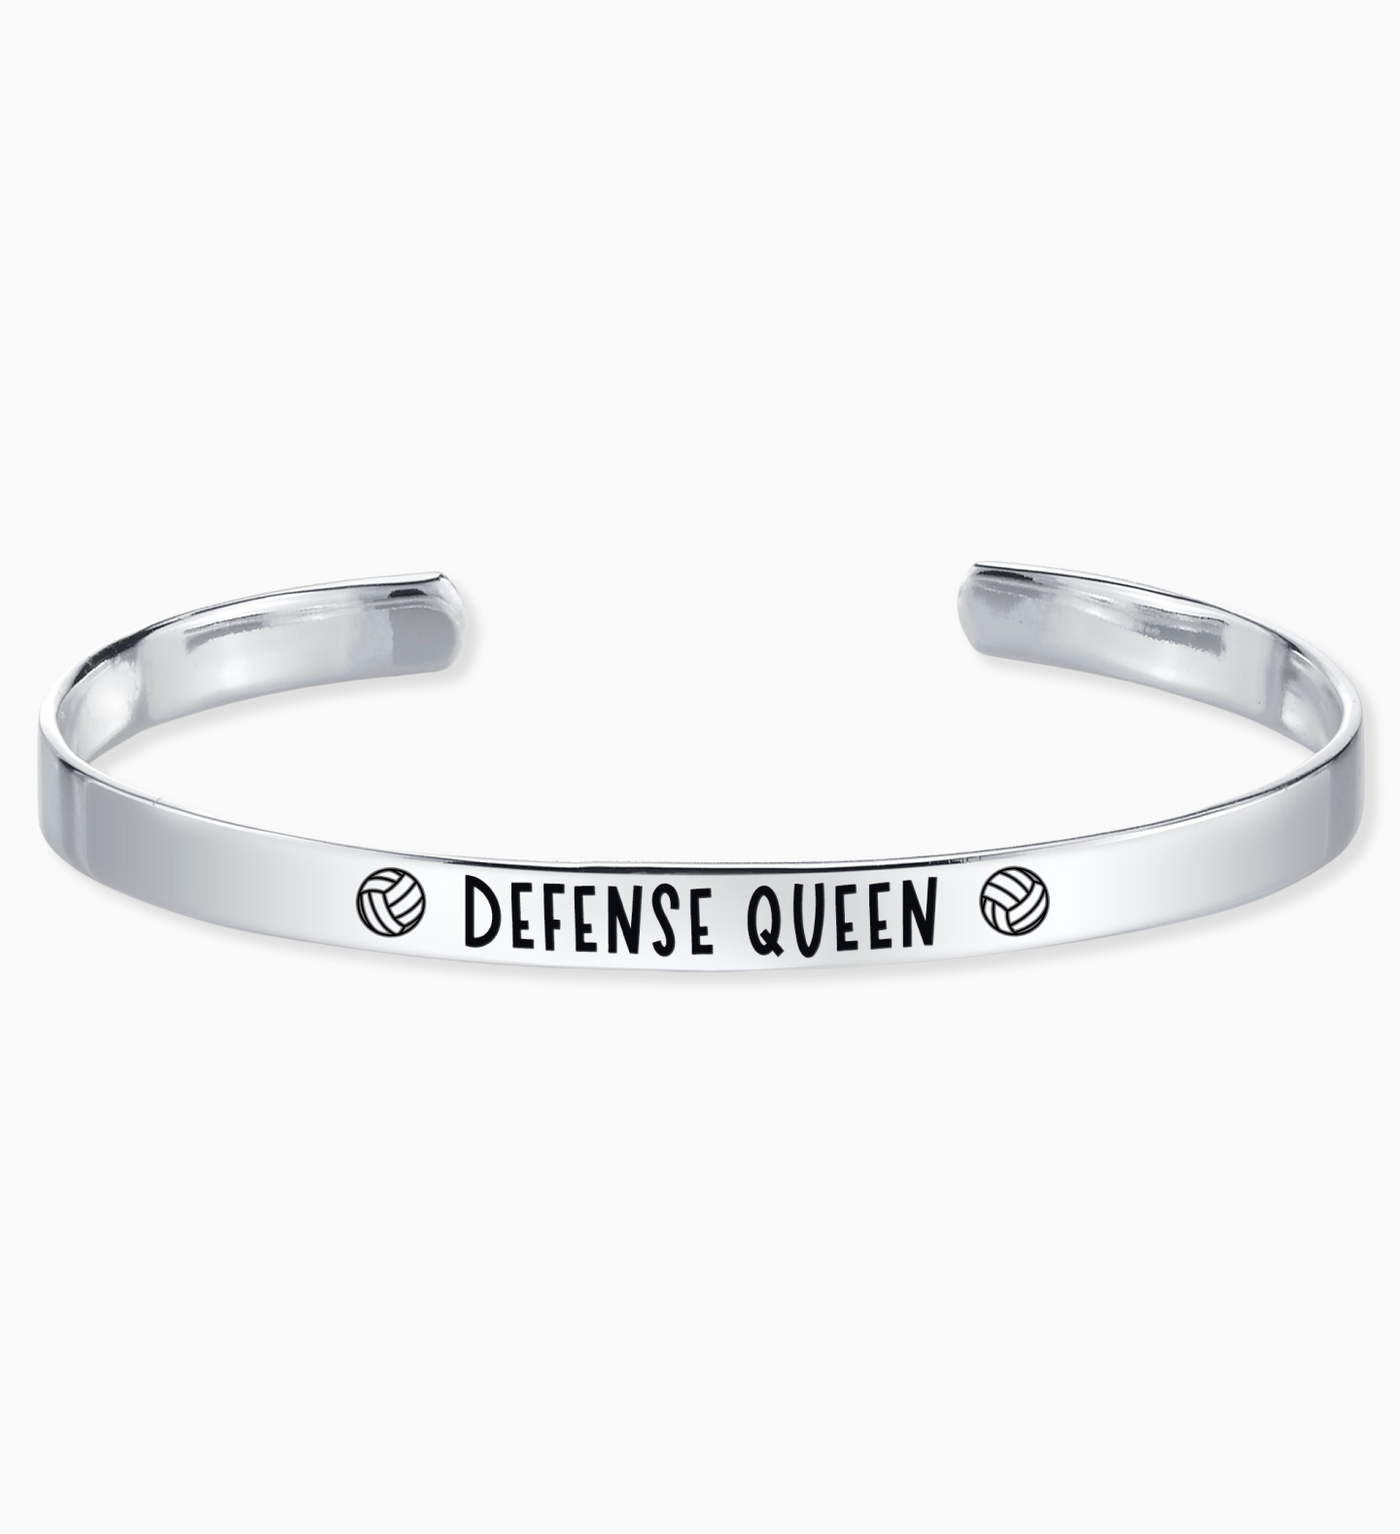 Defense Queen - Volleyball Position Engraved Bangle